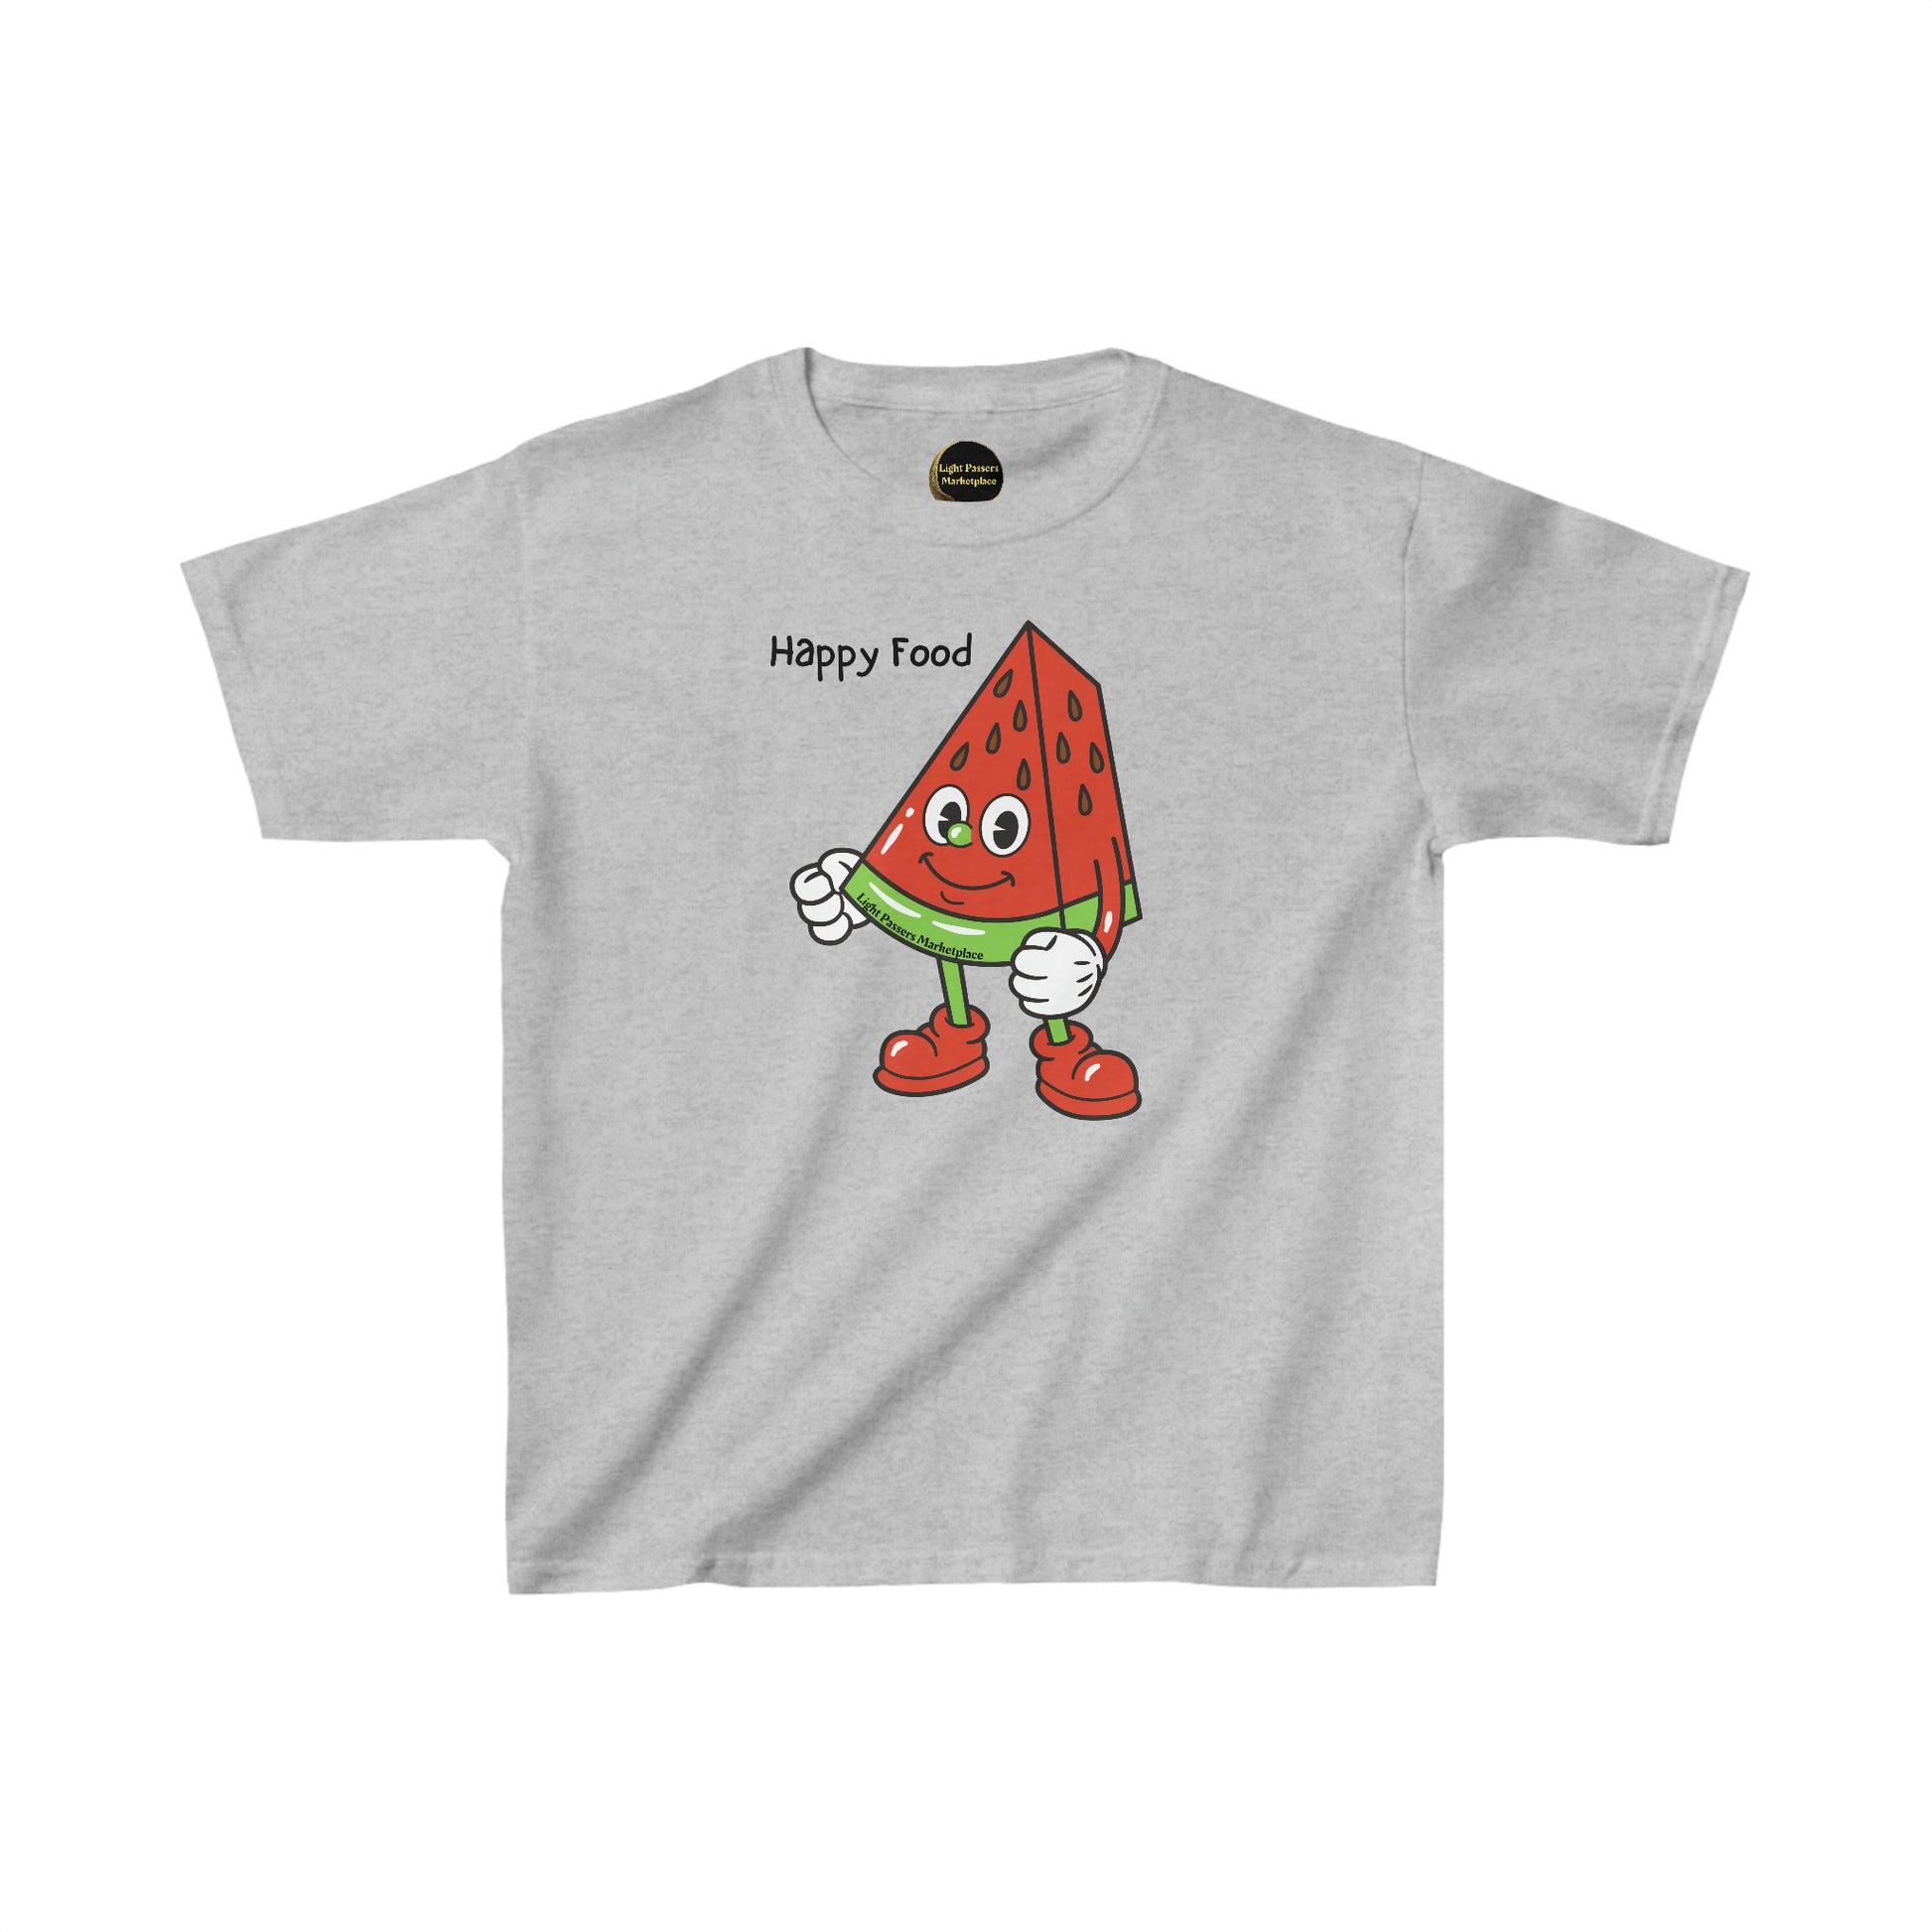 Youth t-shirt featuring a cartoon watermelon character, made of 100% cotton for comfort and durability. Crew neckline, tear-away labels, and ethically sourced US cotton.